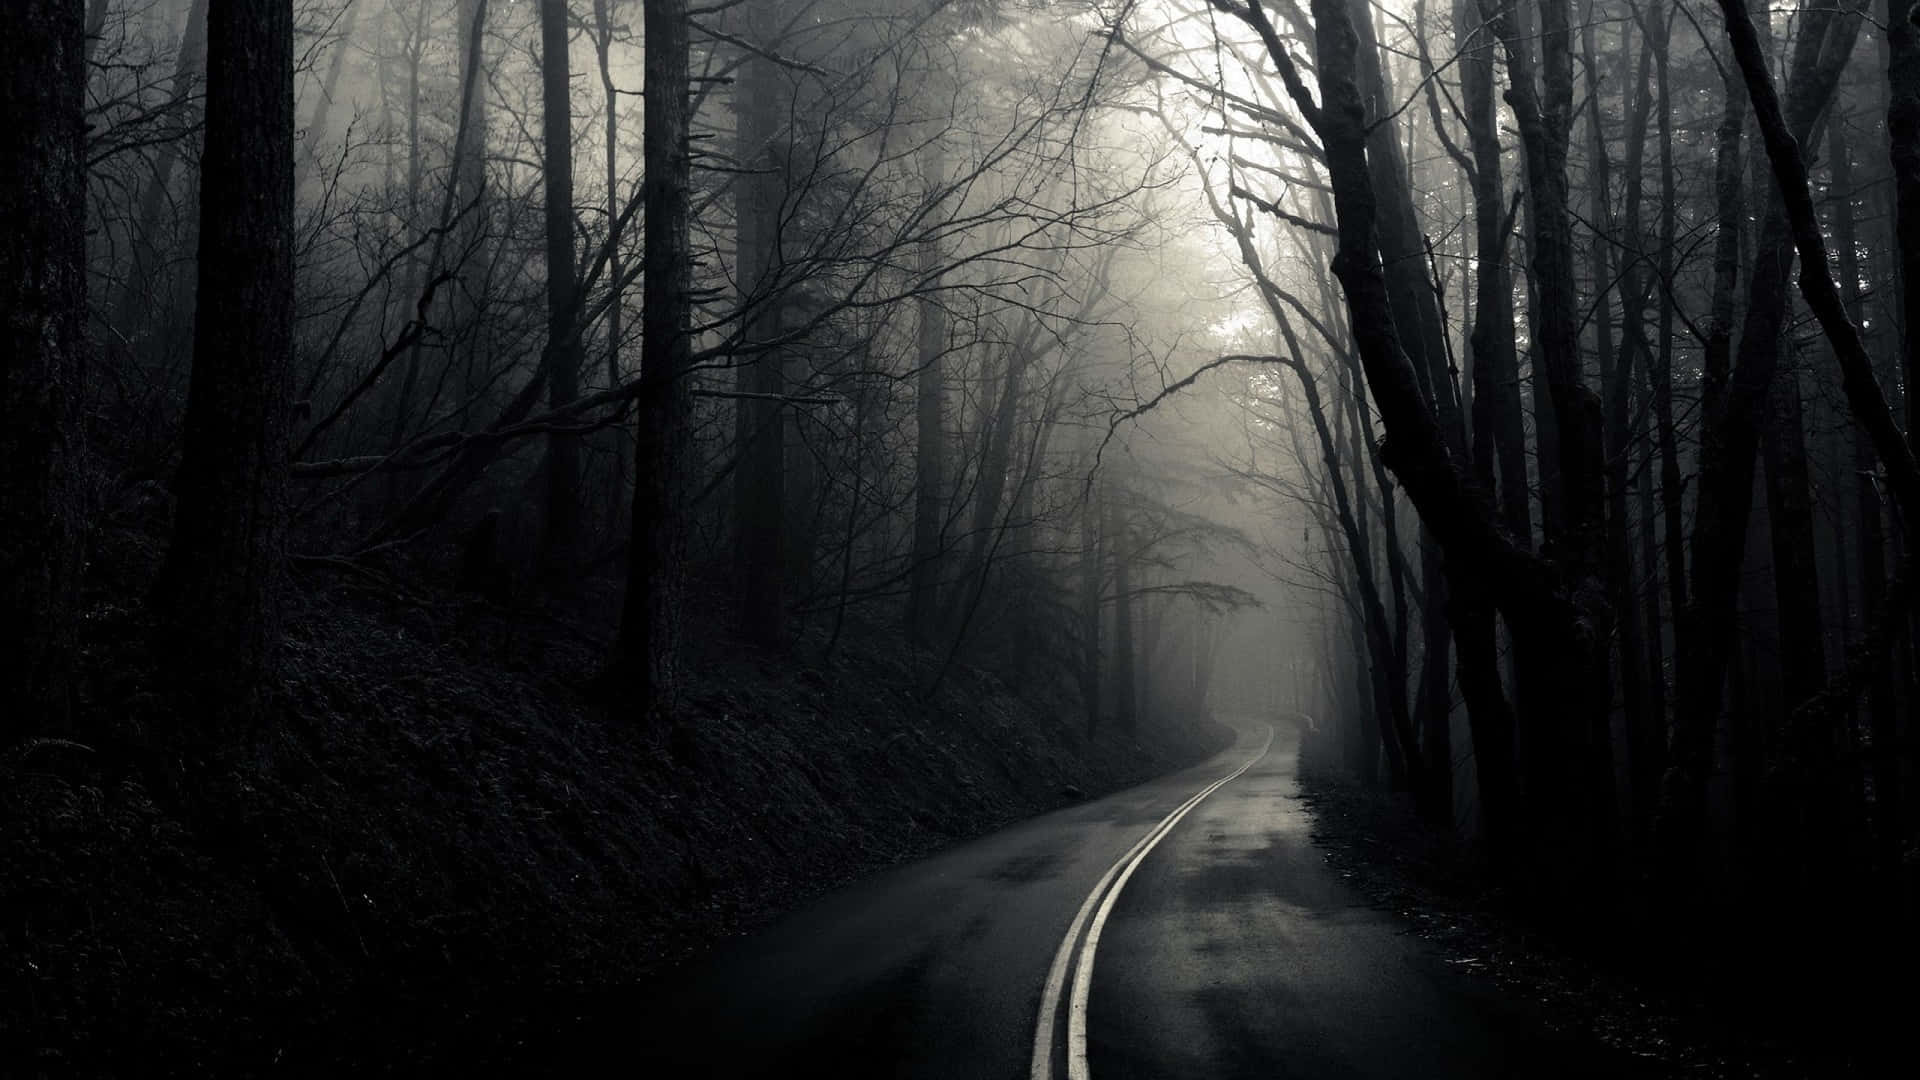 Dark Depressing Road In The Forest